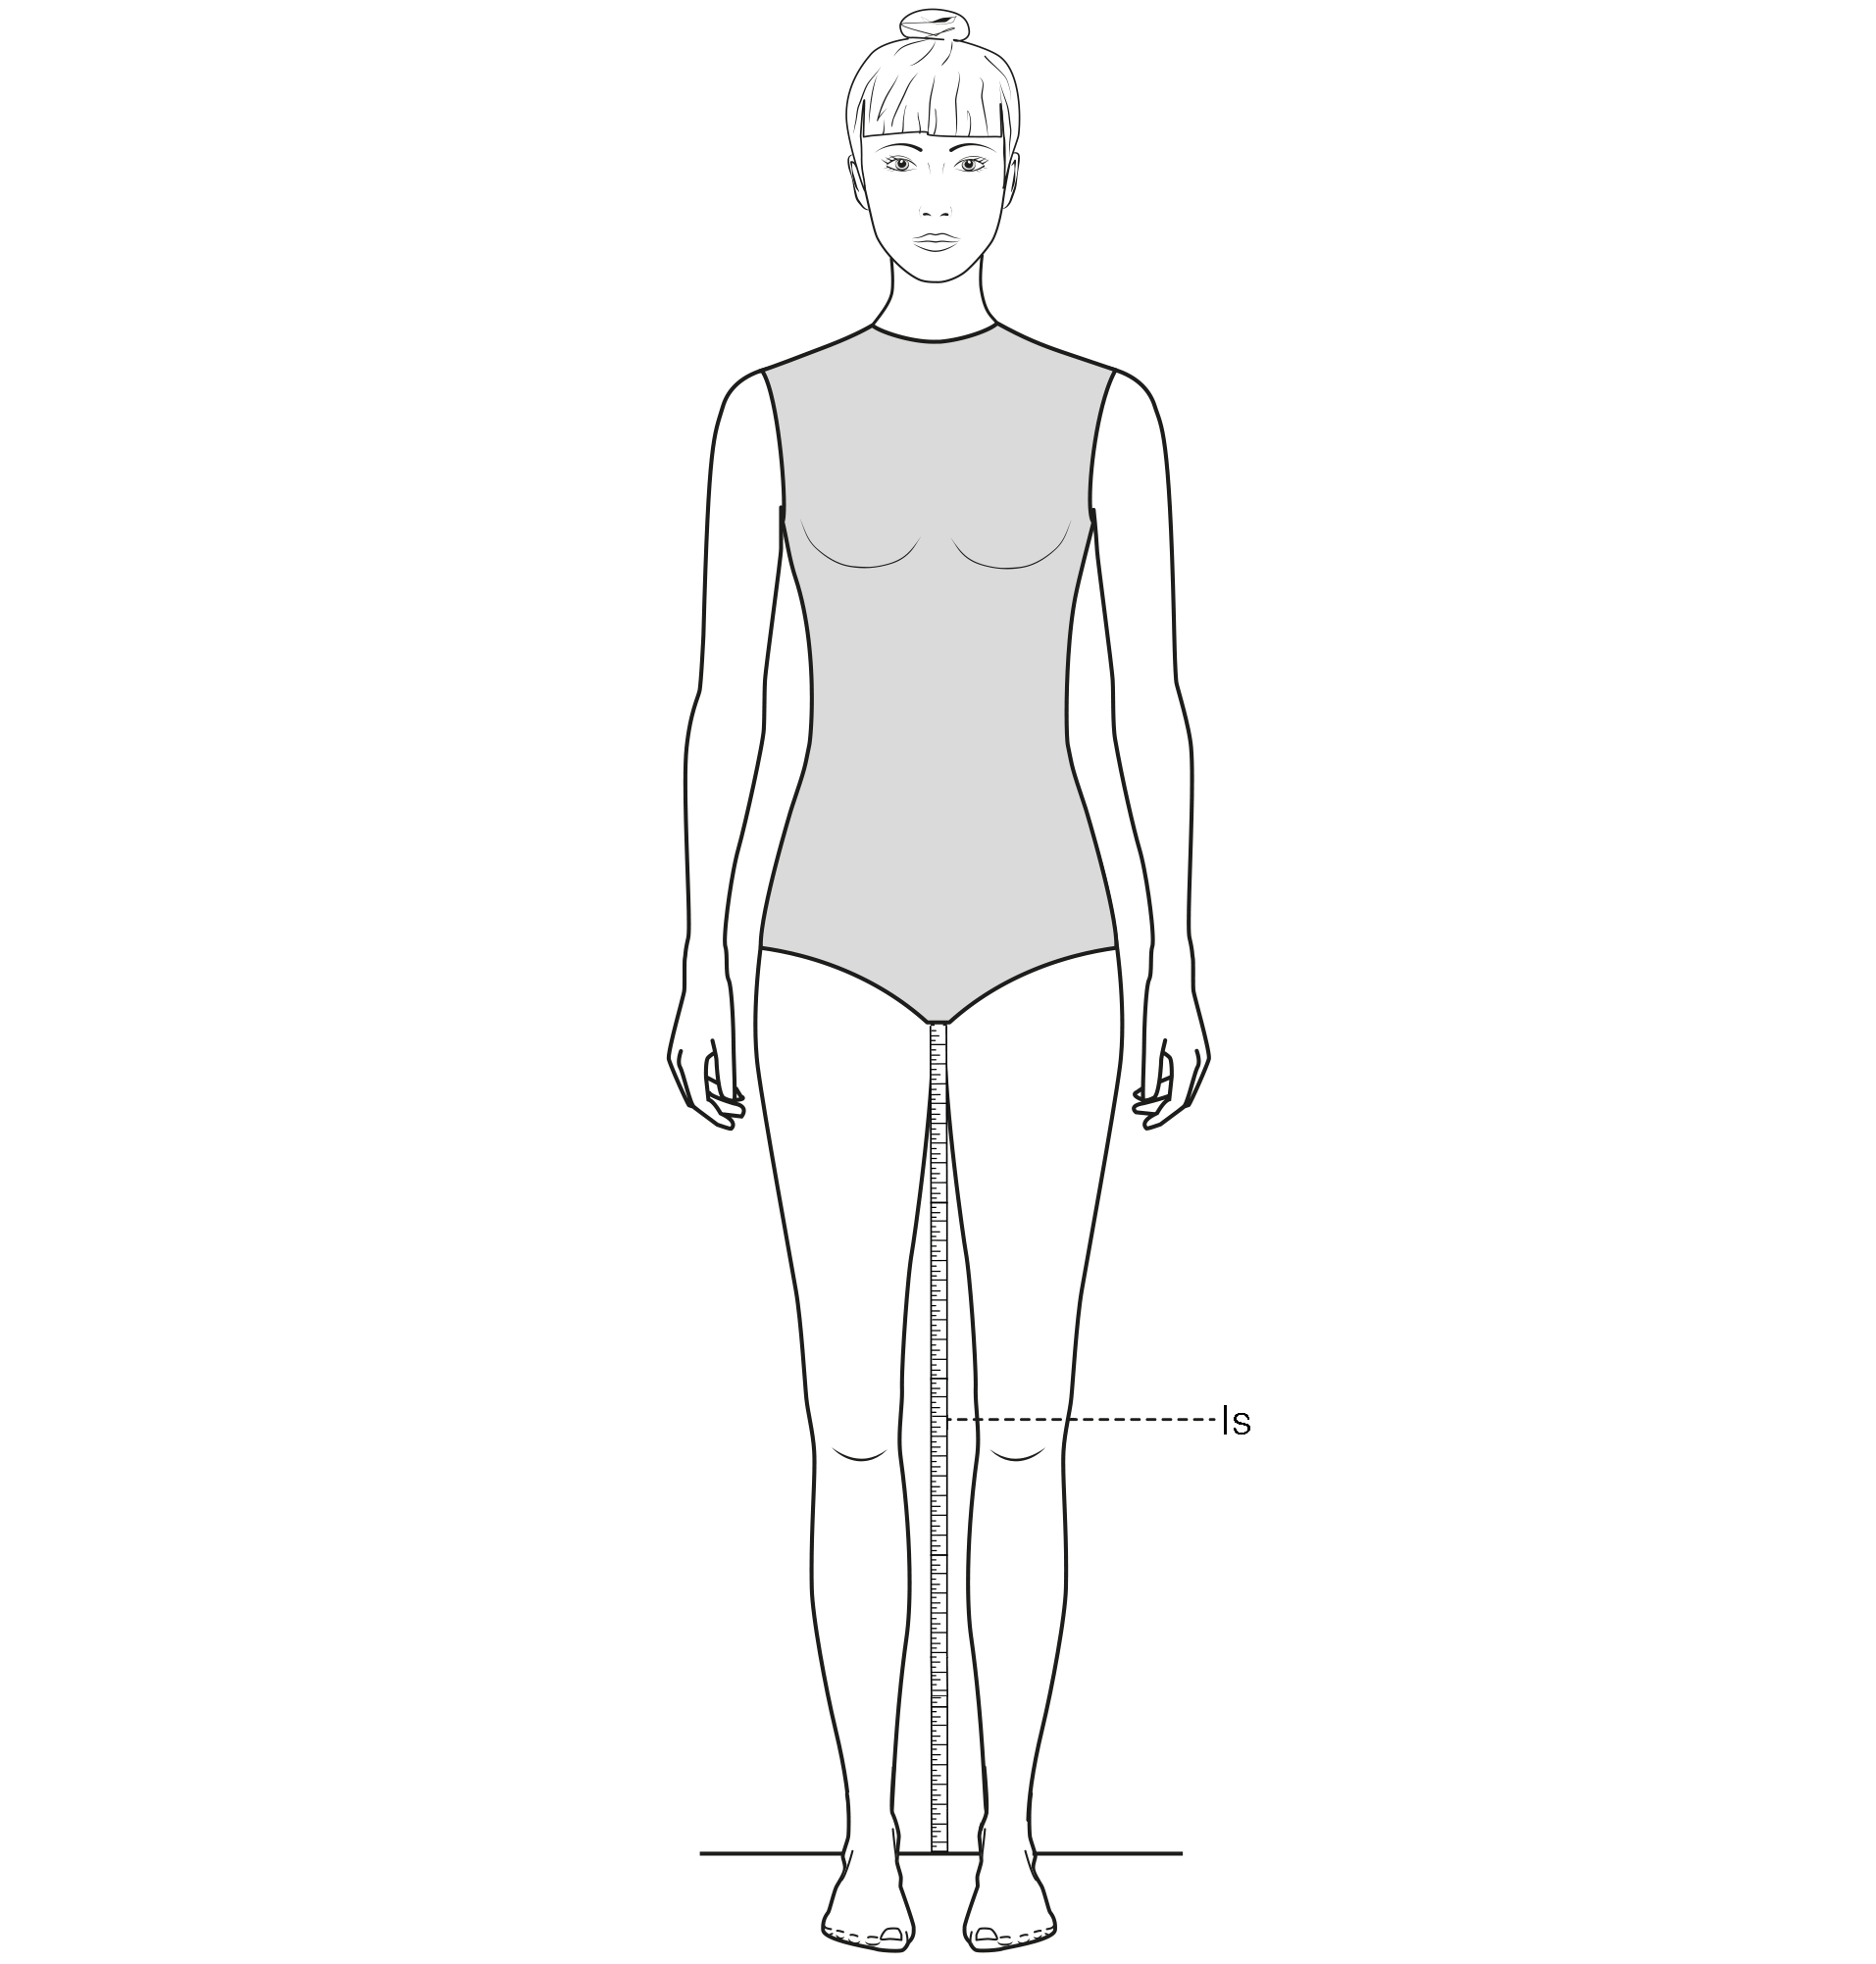 This figure shows the measurement of the Inseam